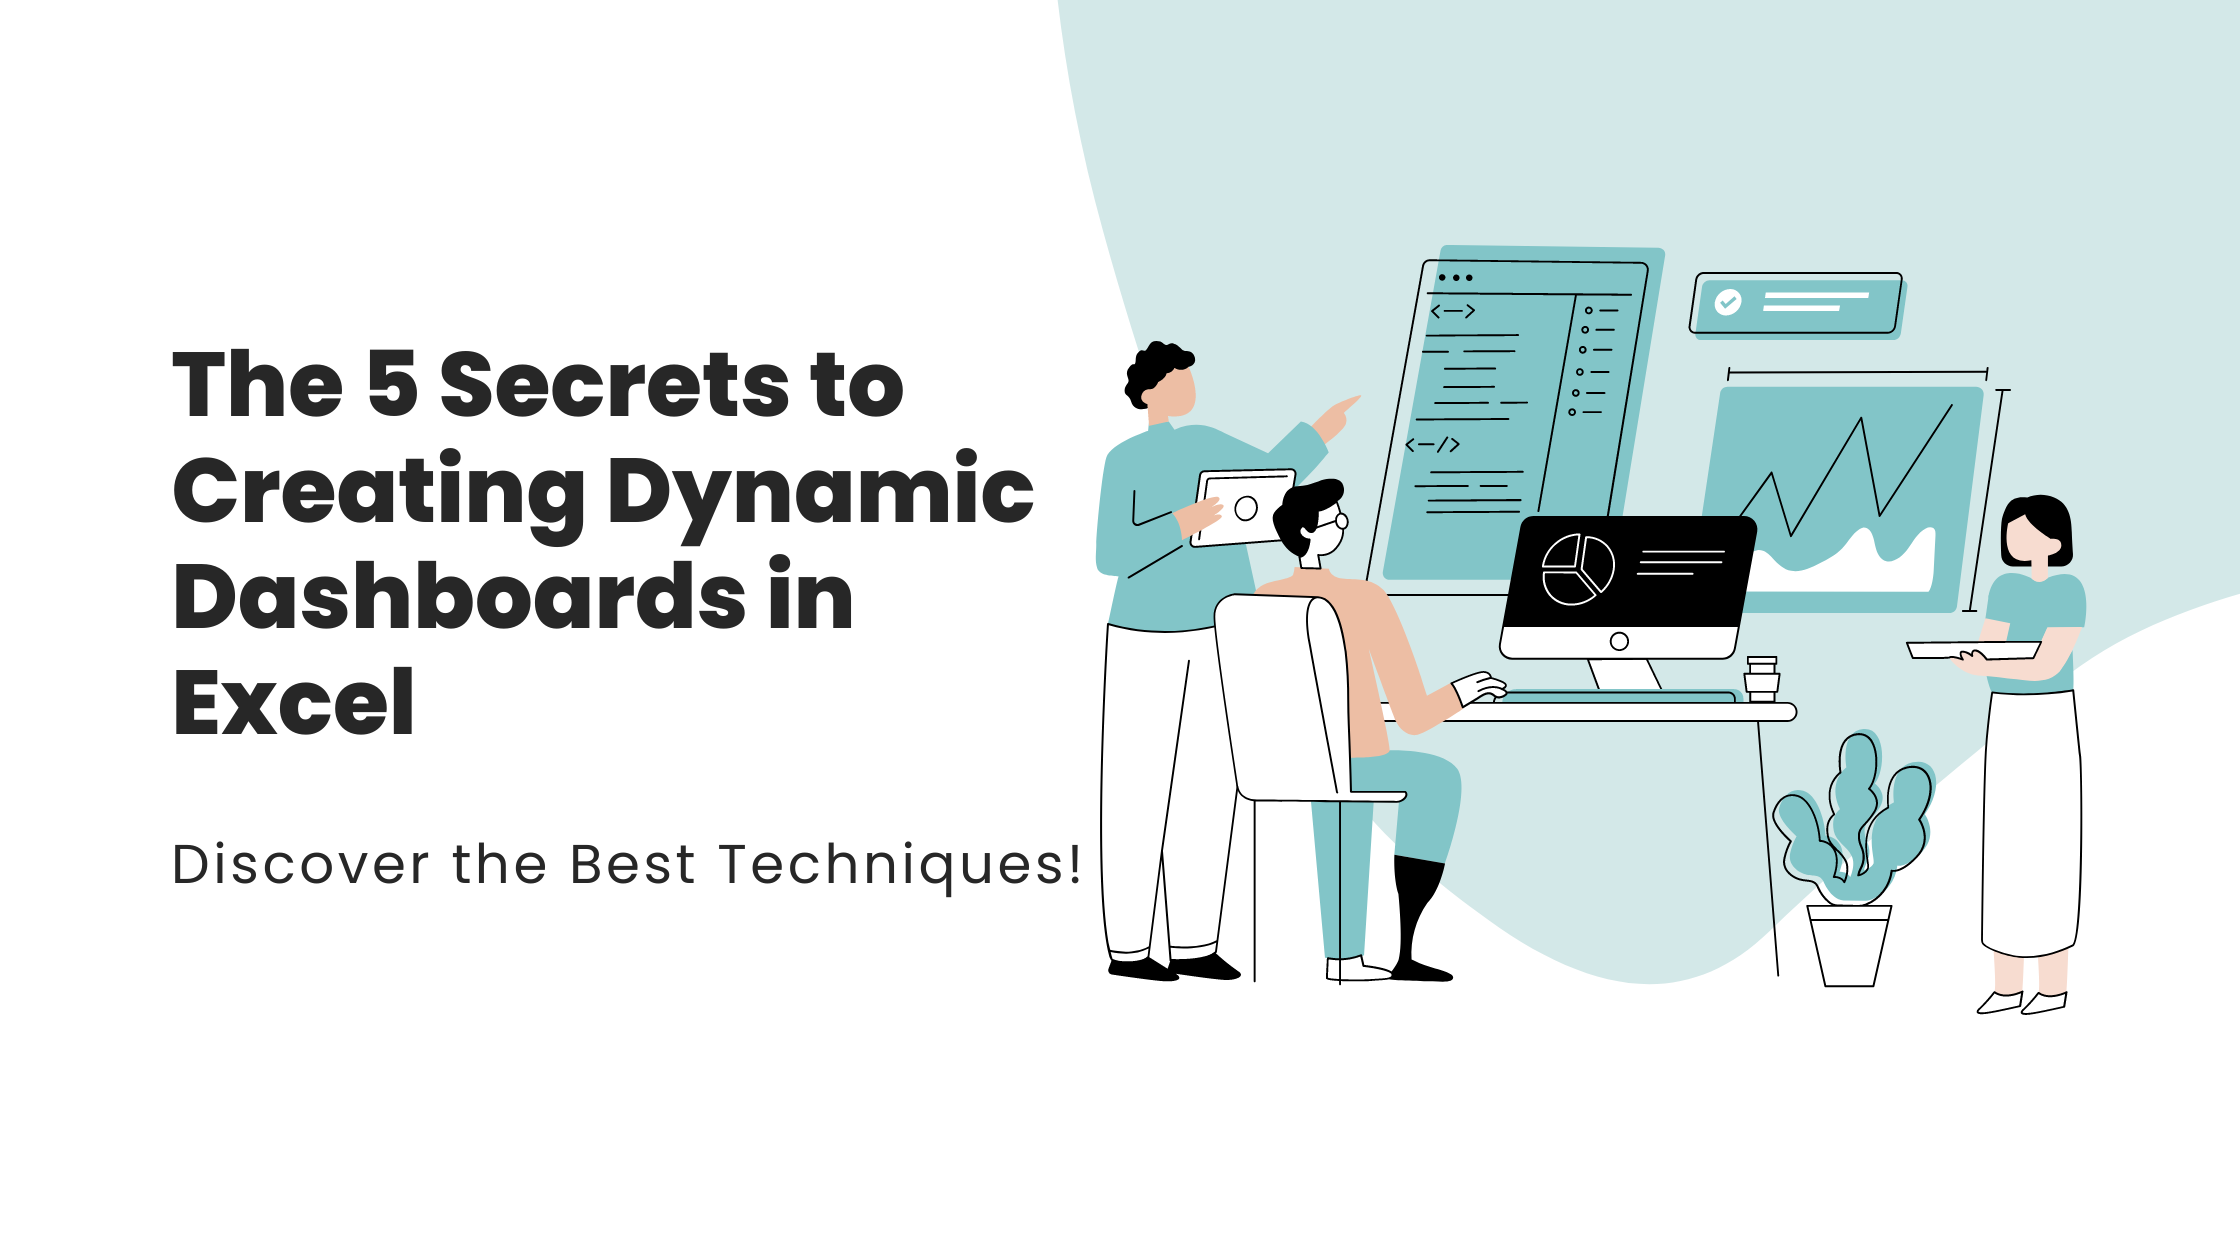 The 5 Secrets to Creating Dynamic Dashboards in Excel